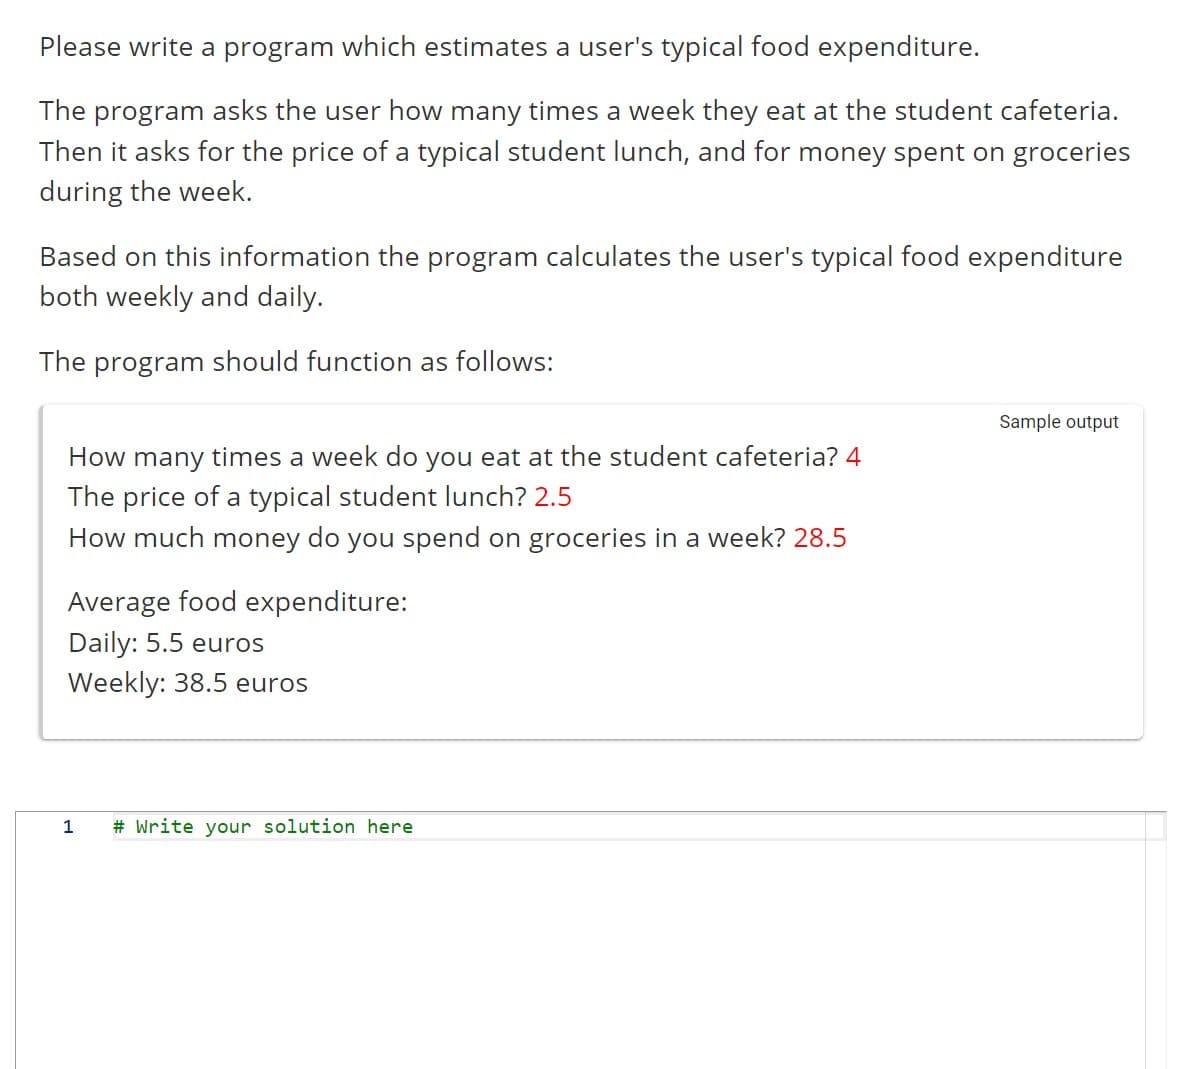 Please write a program which estimates a user's typical food expenditure.
The program asks the user how many times a week they eat at the student cafeteria.
Then it asks for the price of a typical student lunch, and for money spent on groceries
during the week.
Based on this information the program calculates the user's typical food expenditure
both weekly and daily.
The program should function as follows:
How many times a week do you eat at the student cafeteria? 4
The price of a typical student lunch? 2.5
How much money do you spend on groceries in a week? 28.5
Average food expenditure:
Daily: 5.5 euros
Weekly: 38.5 euros
1
# Write your solution here
Sample output